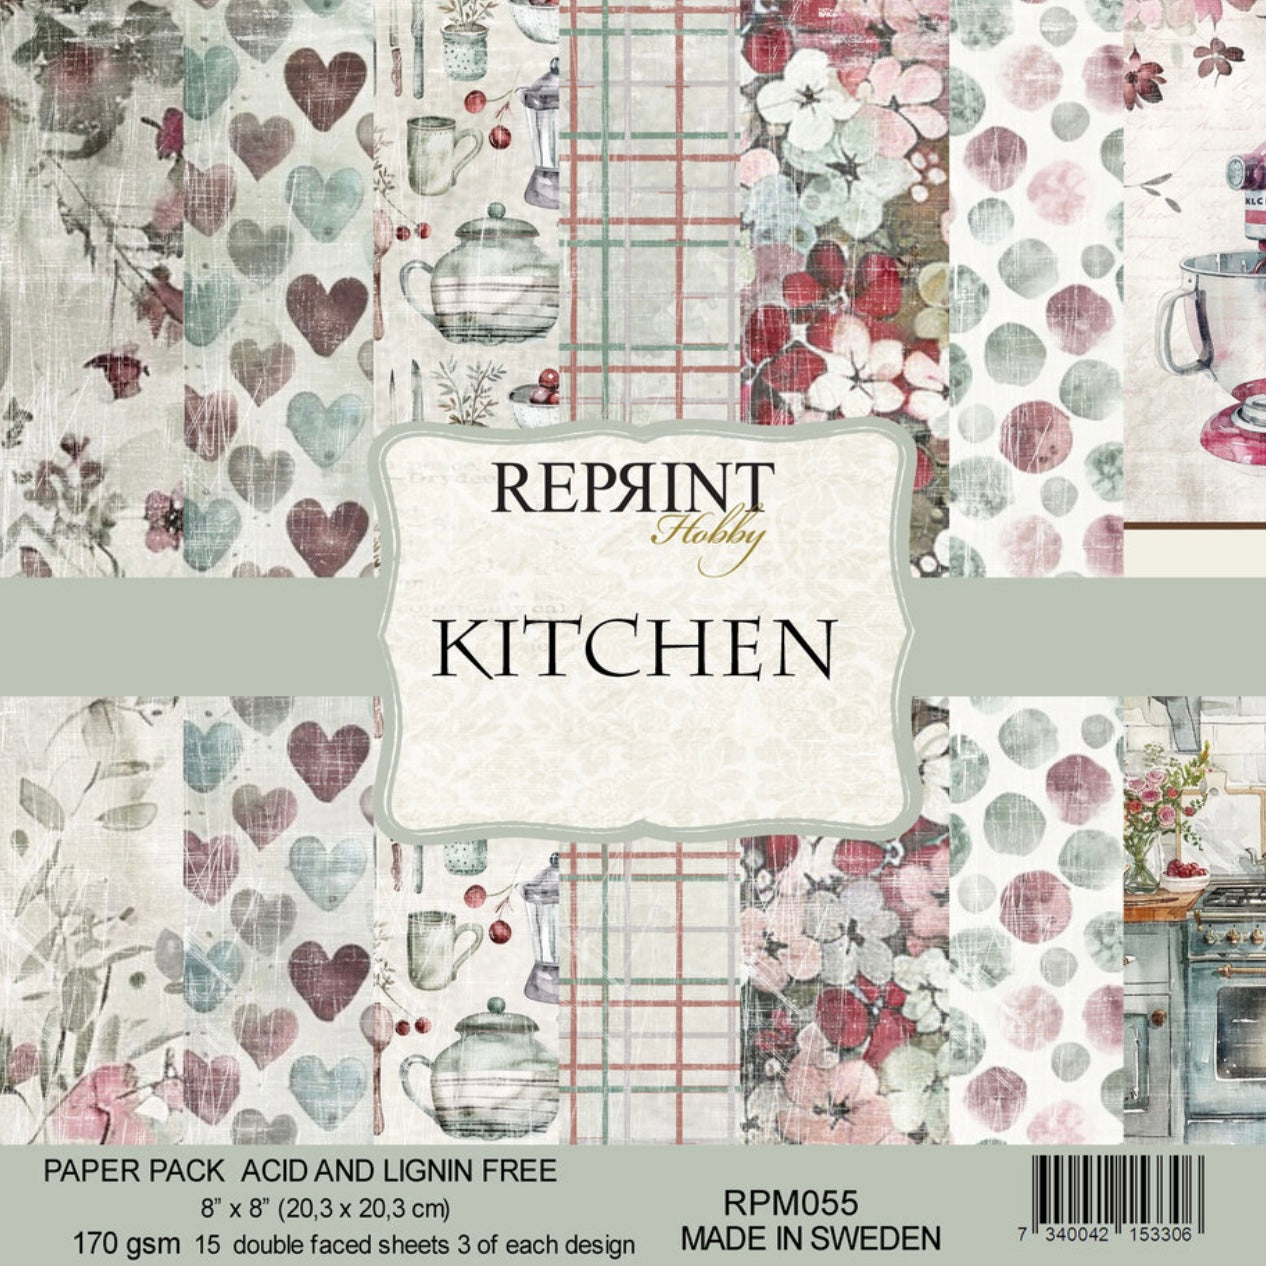 Kitchen Paper Packs - 6 8 and 12 inch options